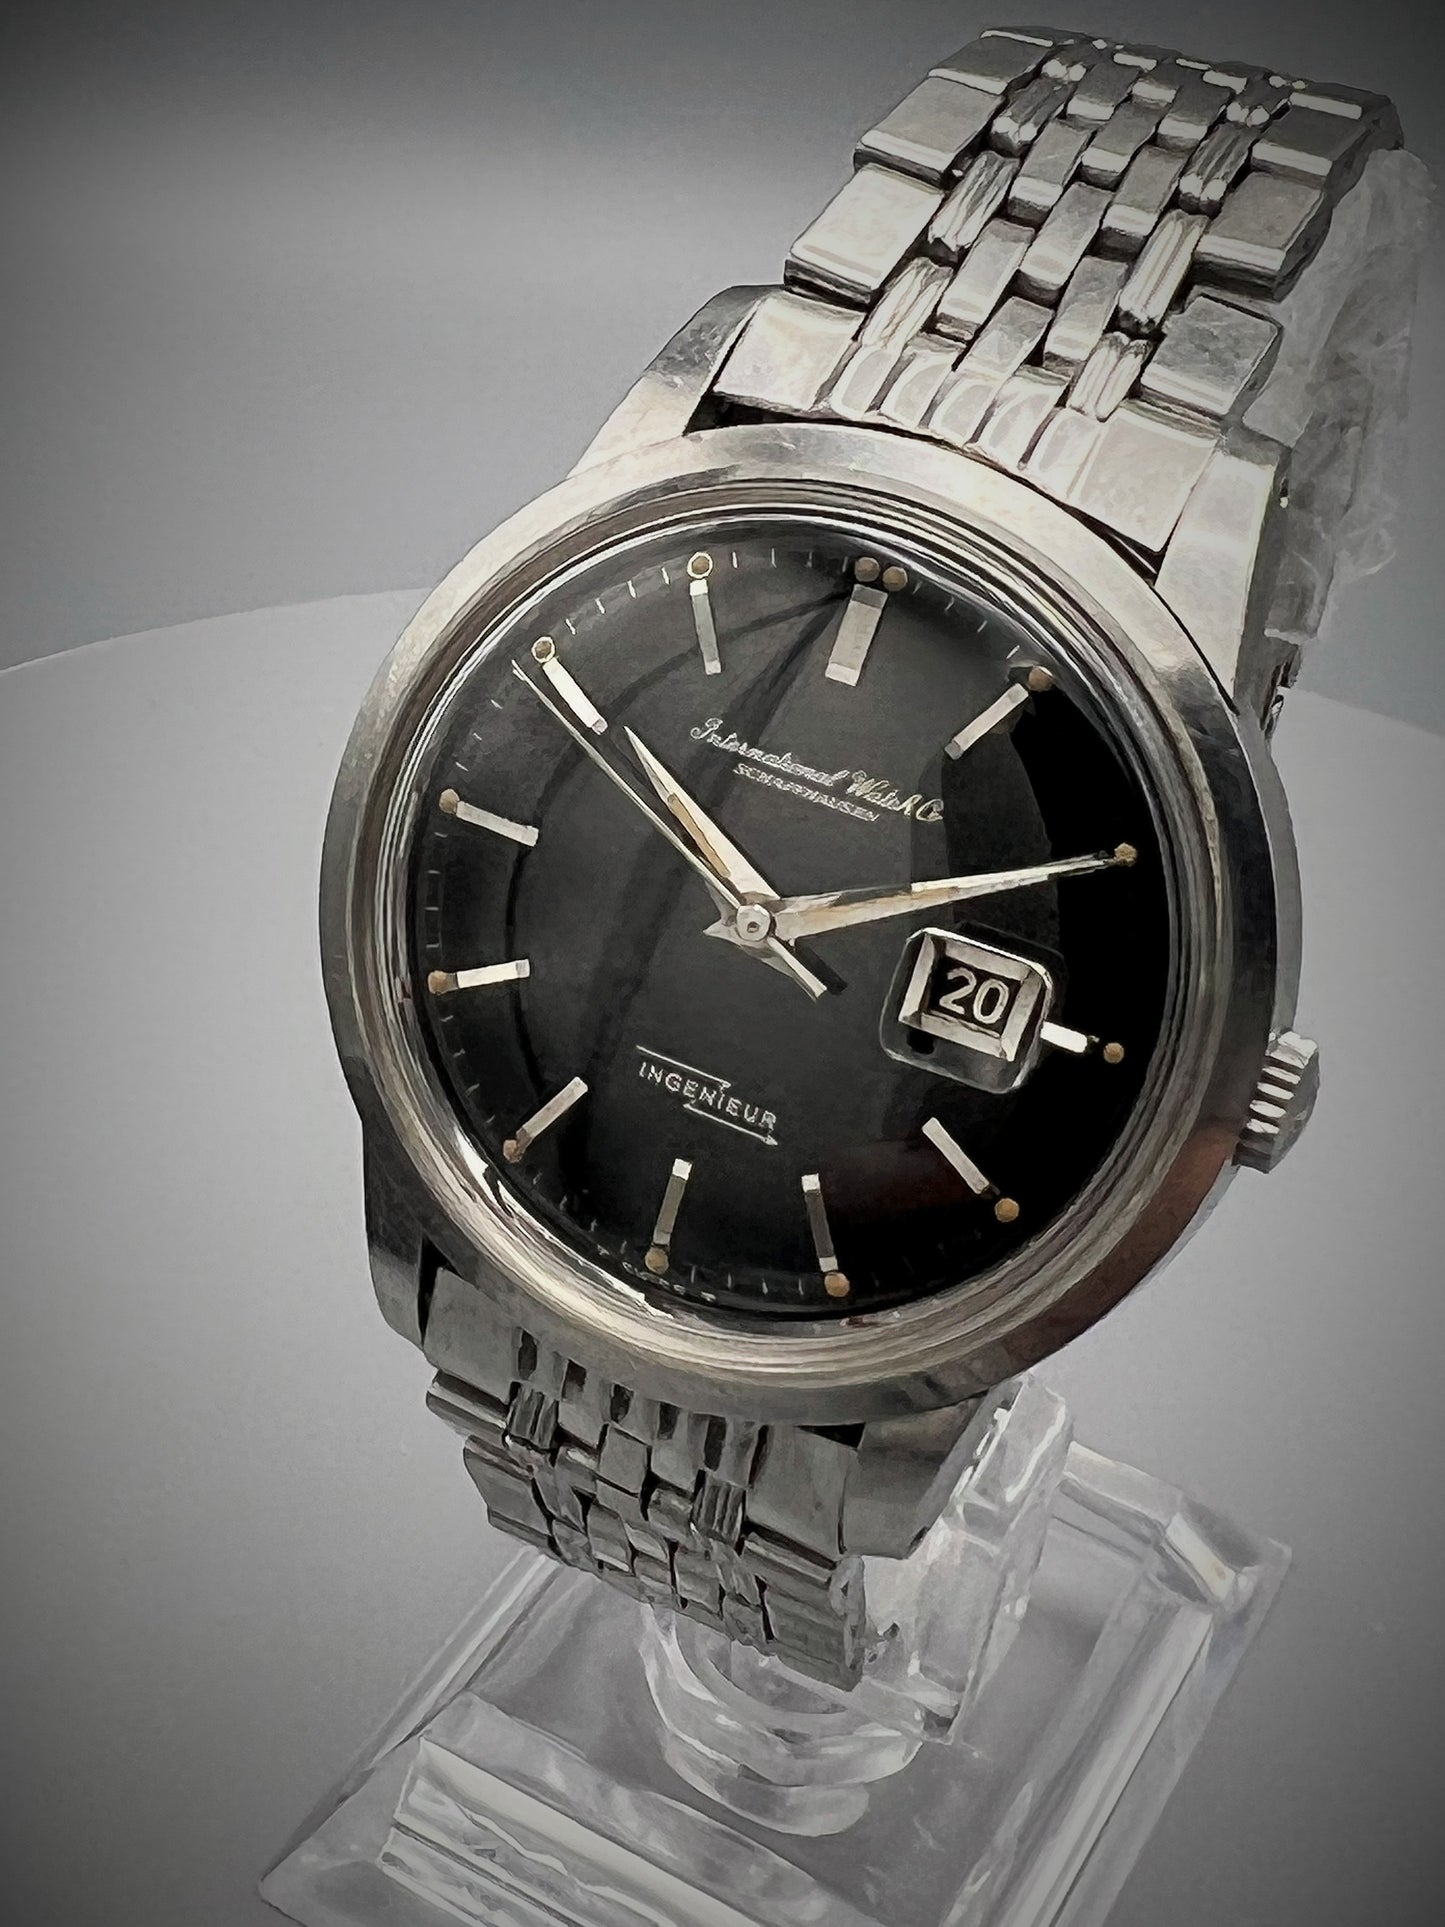 IWC Ingenieur Ref 666, rare stainless steel amagnetic watch with glossy gilt dial, blackout date, 1960